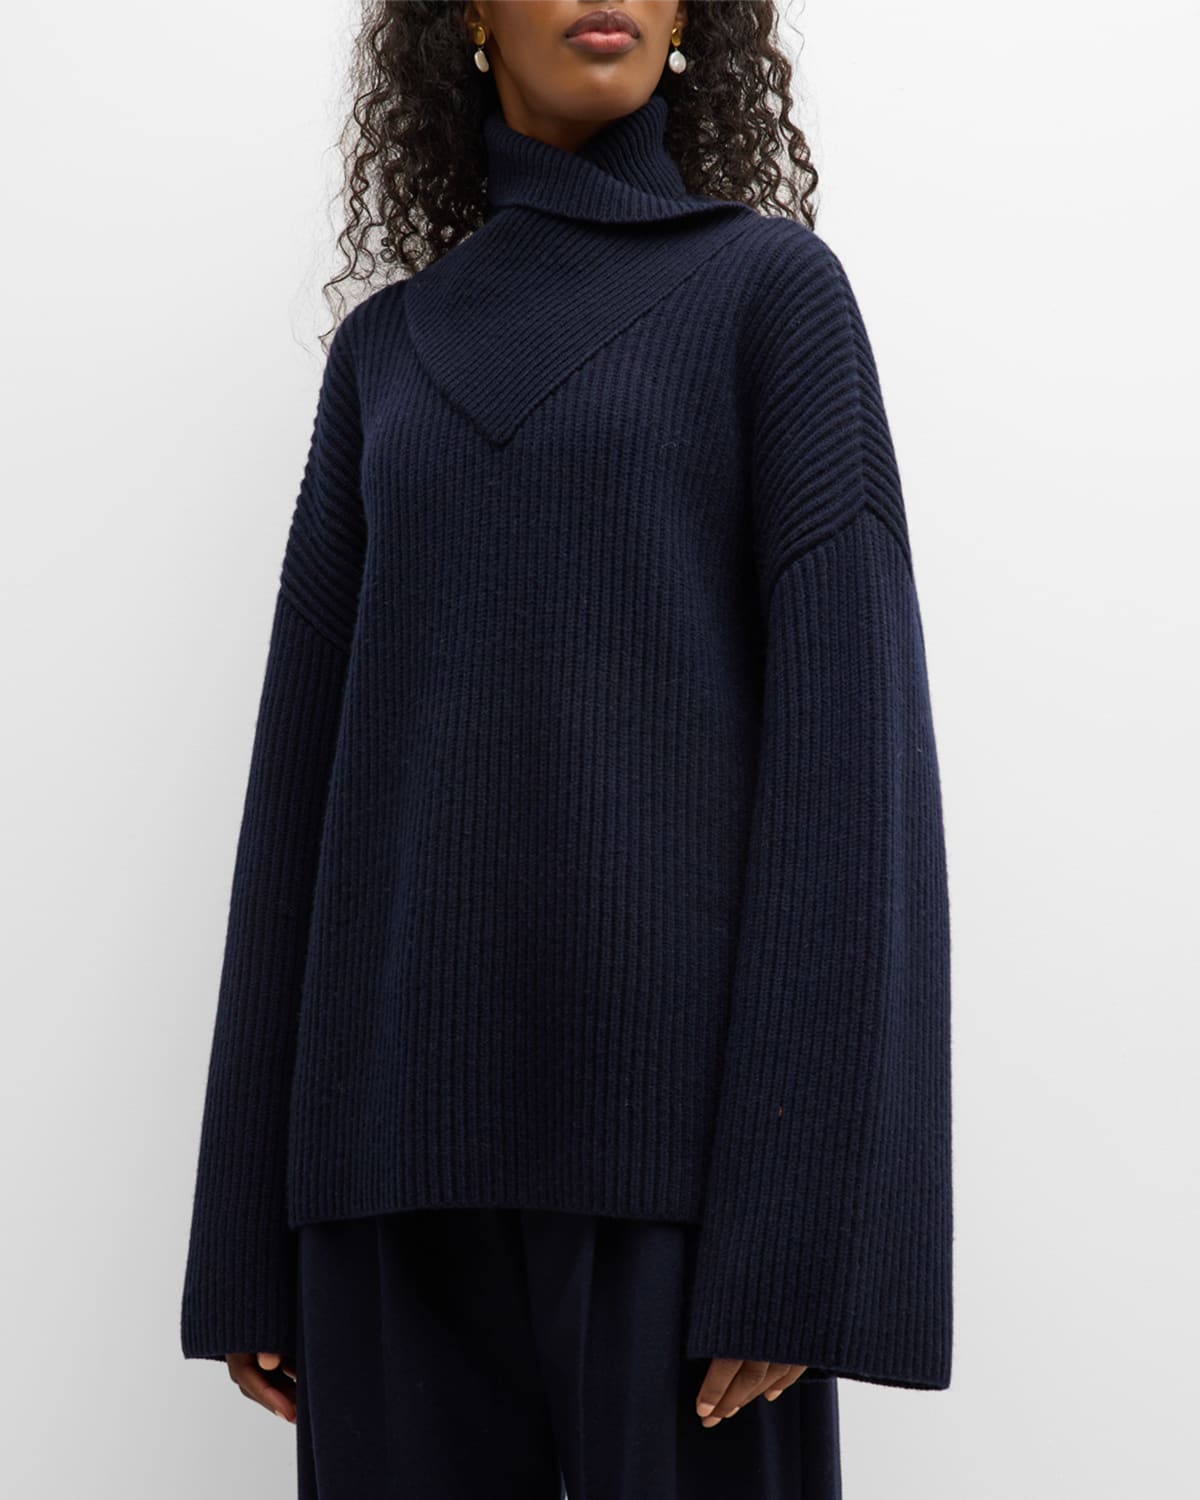 Toteme Wrapped Turtleneck Knit Sweater